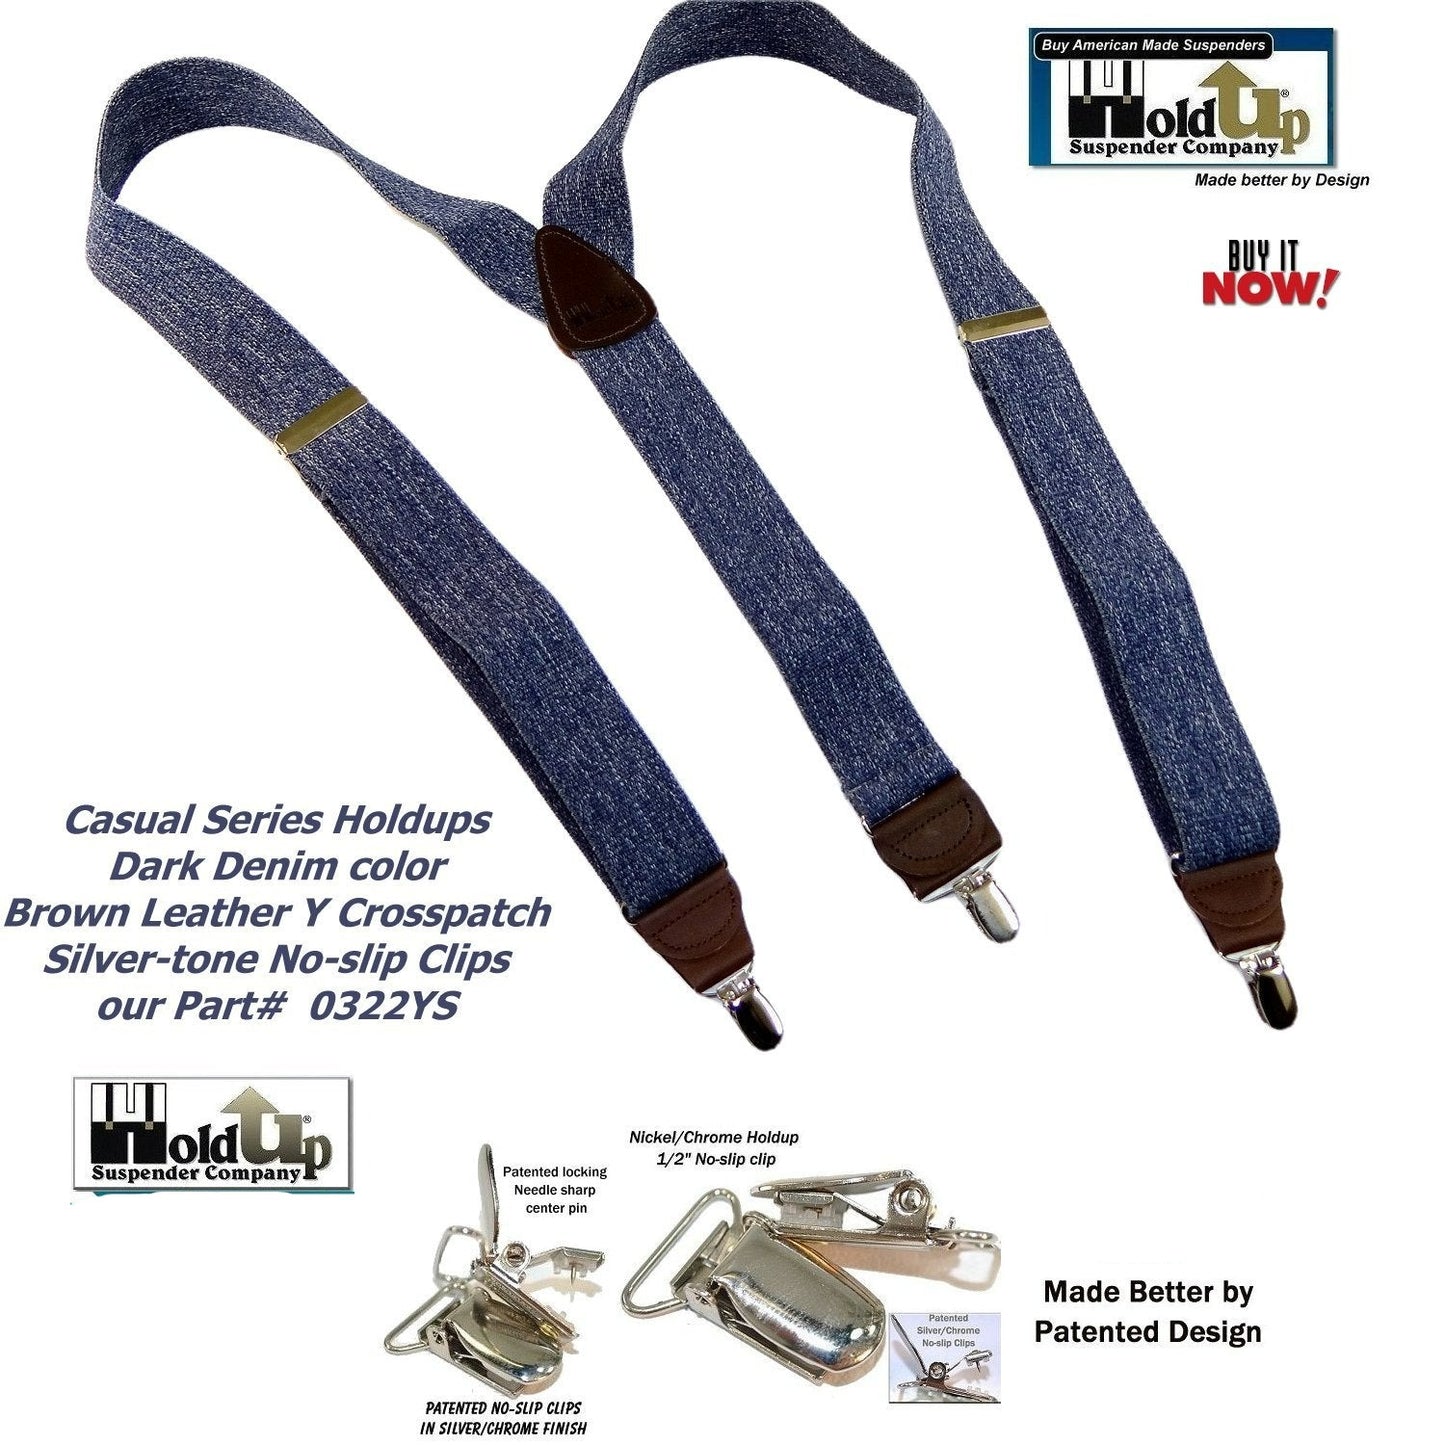 Holdup Brand Dark Denim Casual Series Suspenders are 1 1/2" wide with Y-back style and Patented No-slip Silver Clips